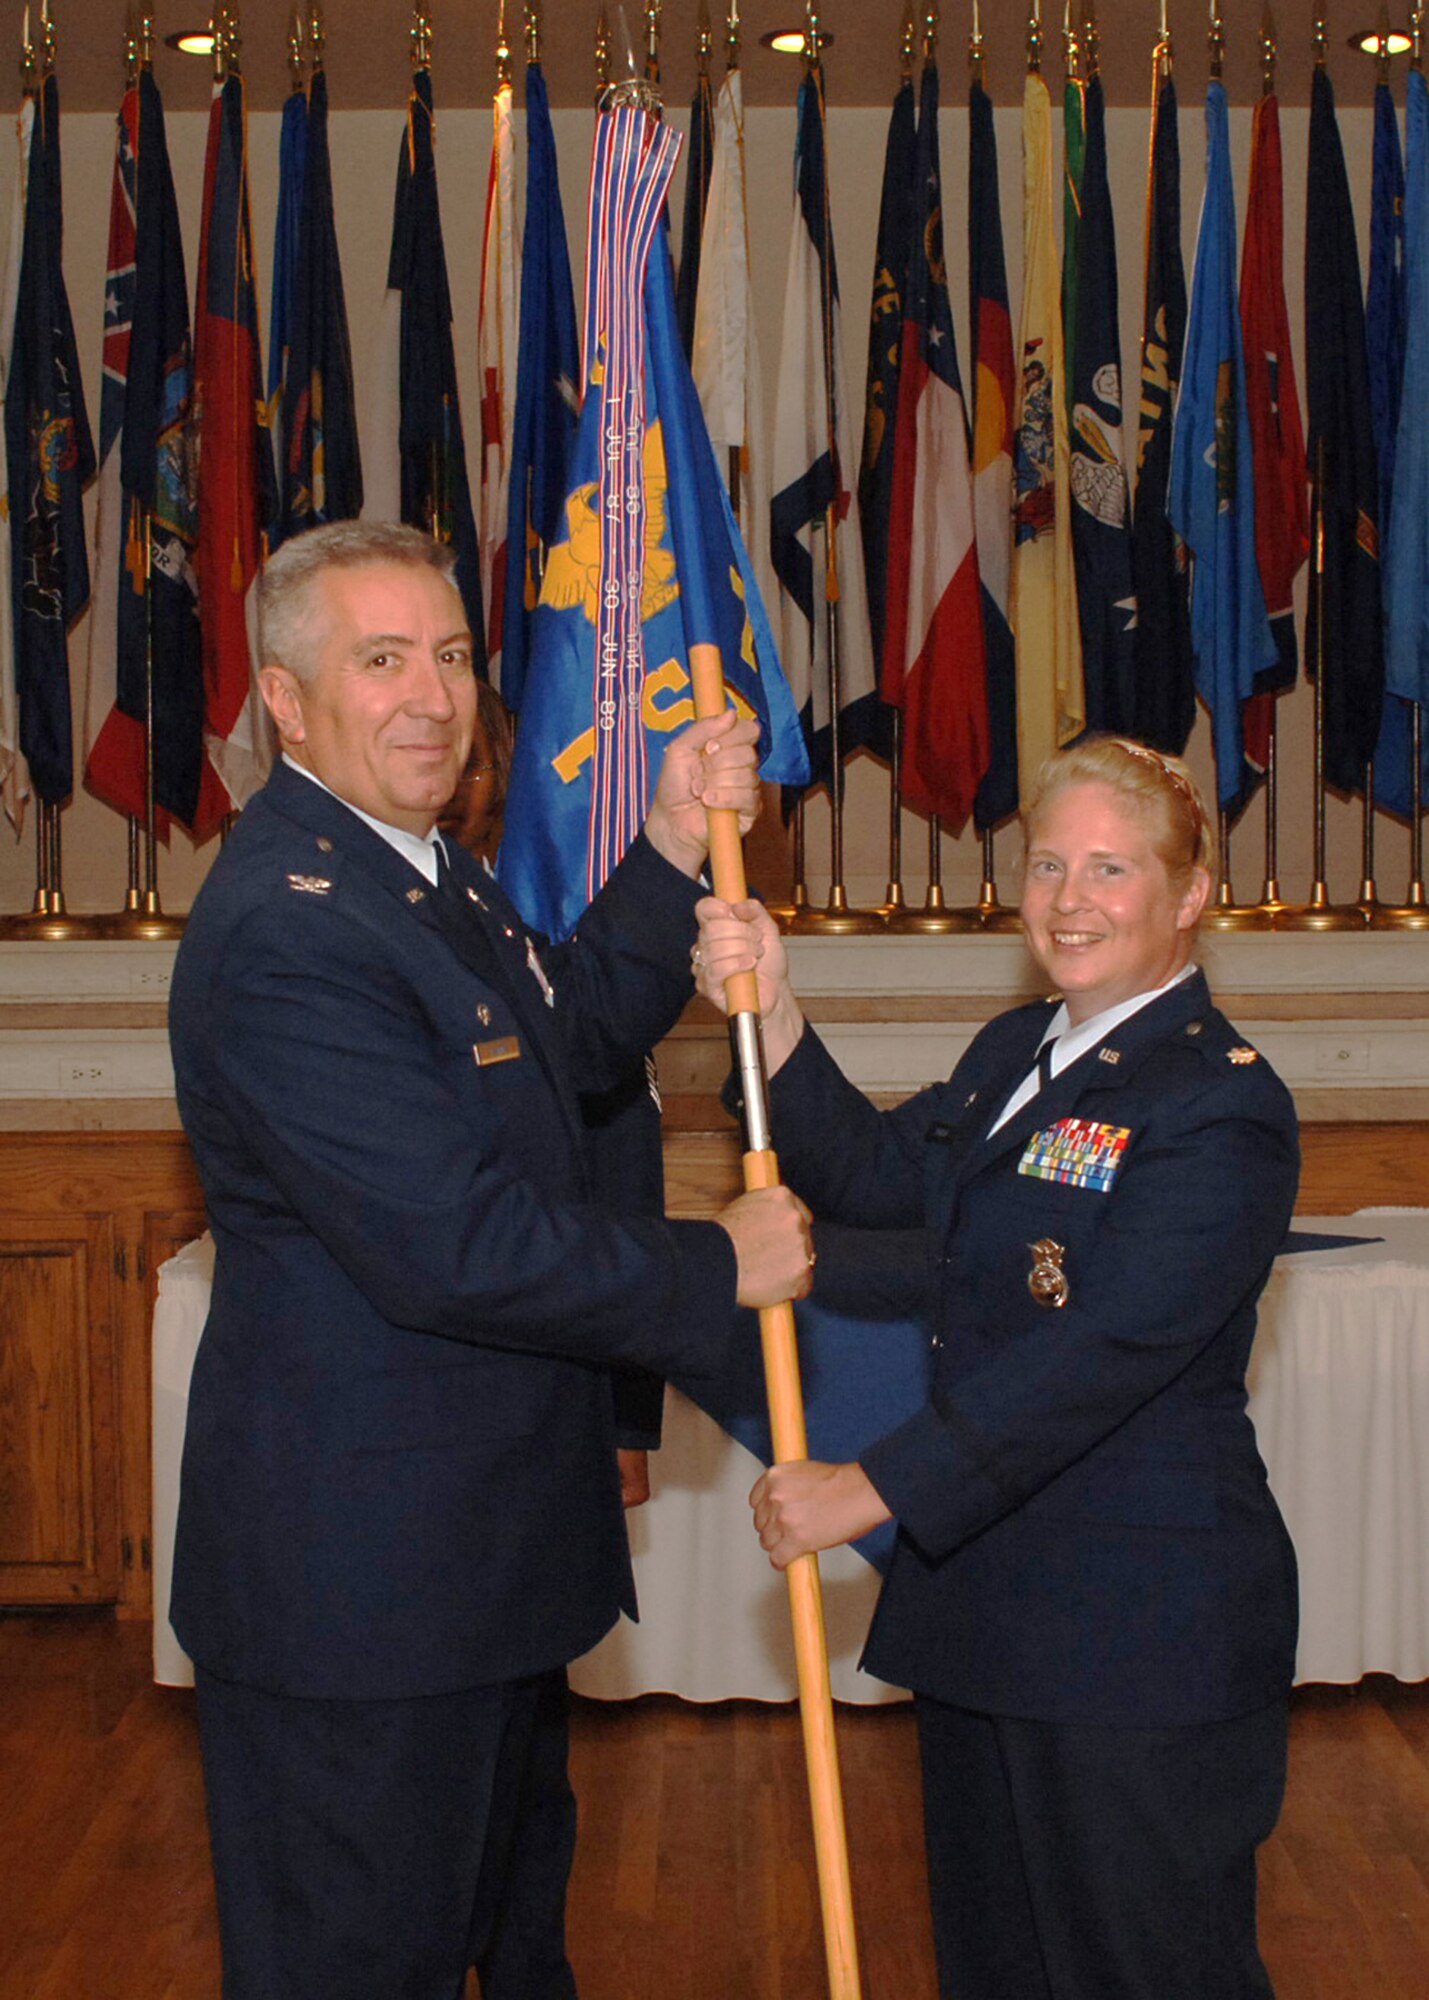 DYESS AIR FORCE BASE, Texas-- Major Frances K. Dorish assumes command over the 7th Security Forces Squadron from Col. James M. Hammes III, 7th Mission Support Group commander, at a change of command ceremony June 18. (U.S Air Force photo by Airman 1st Class Felicia Juenke)